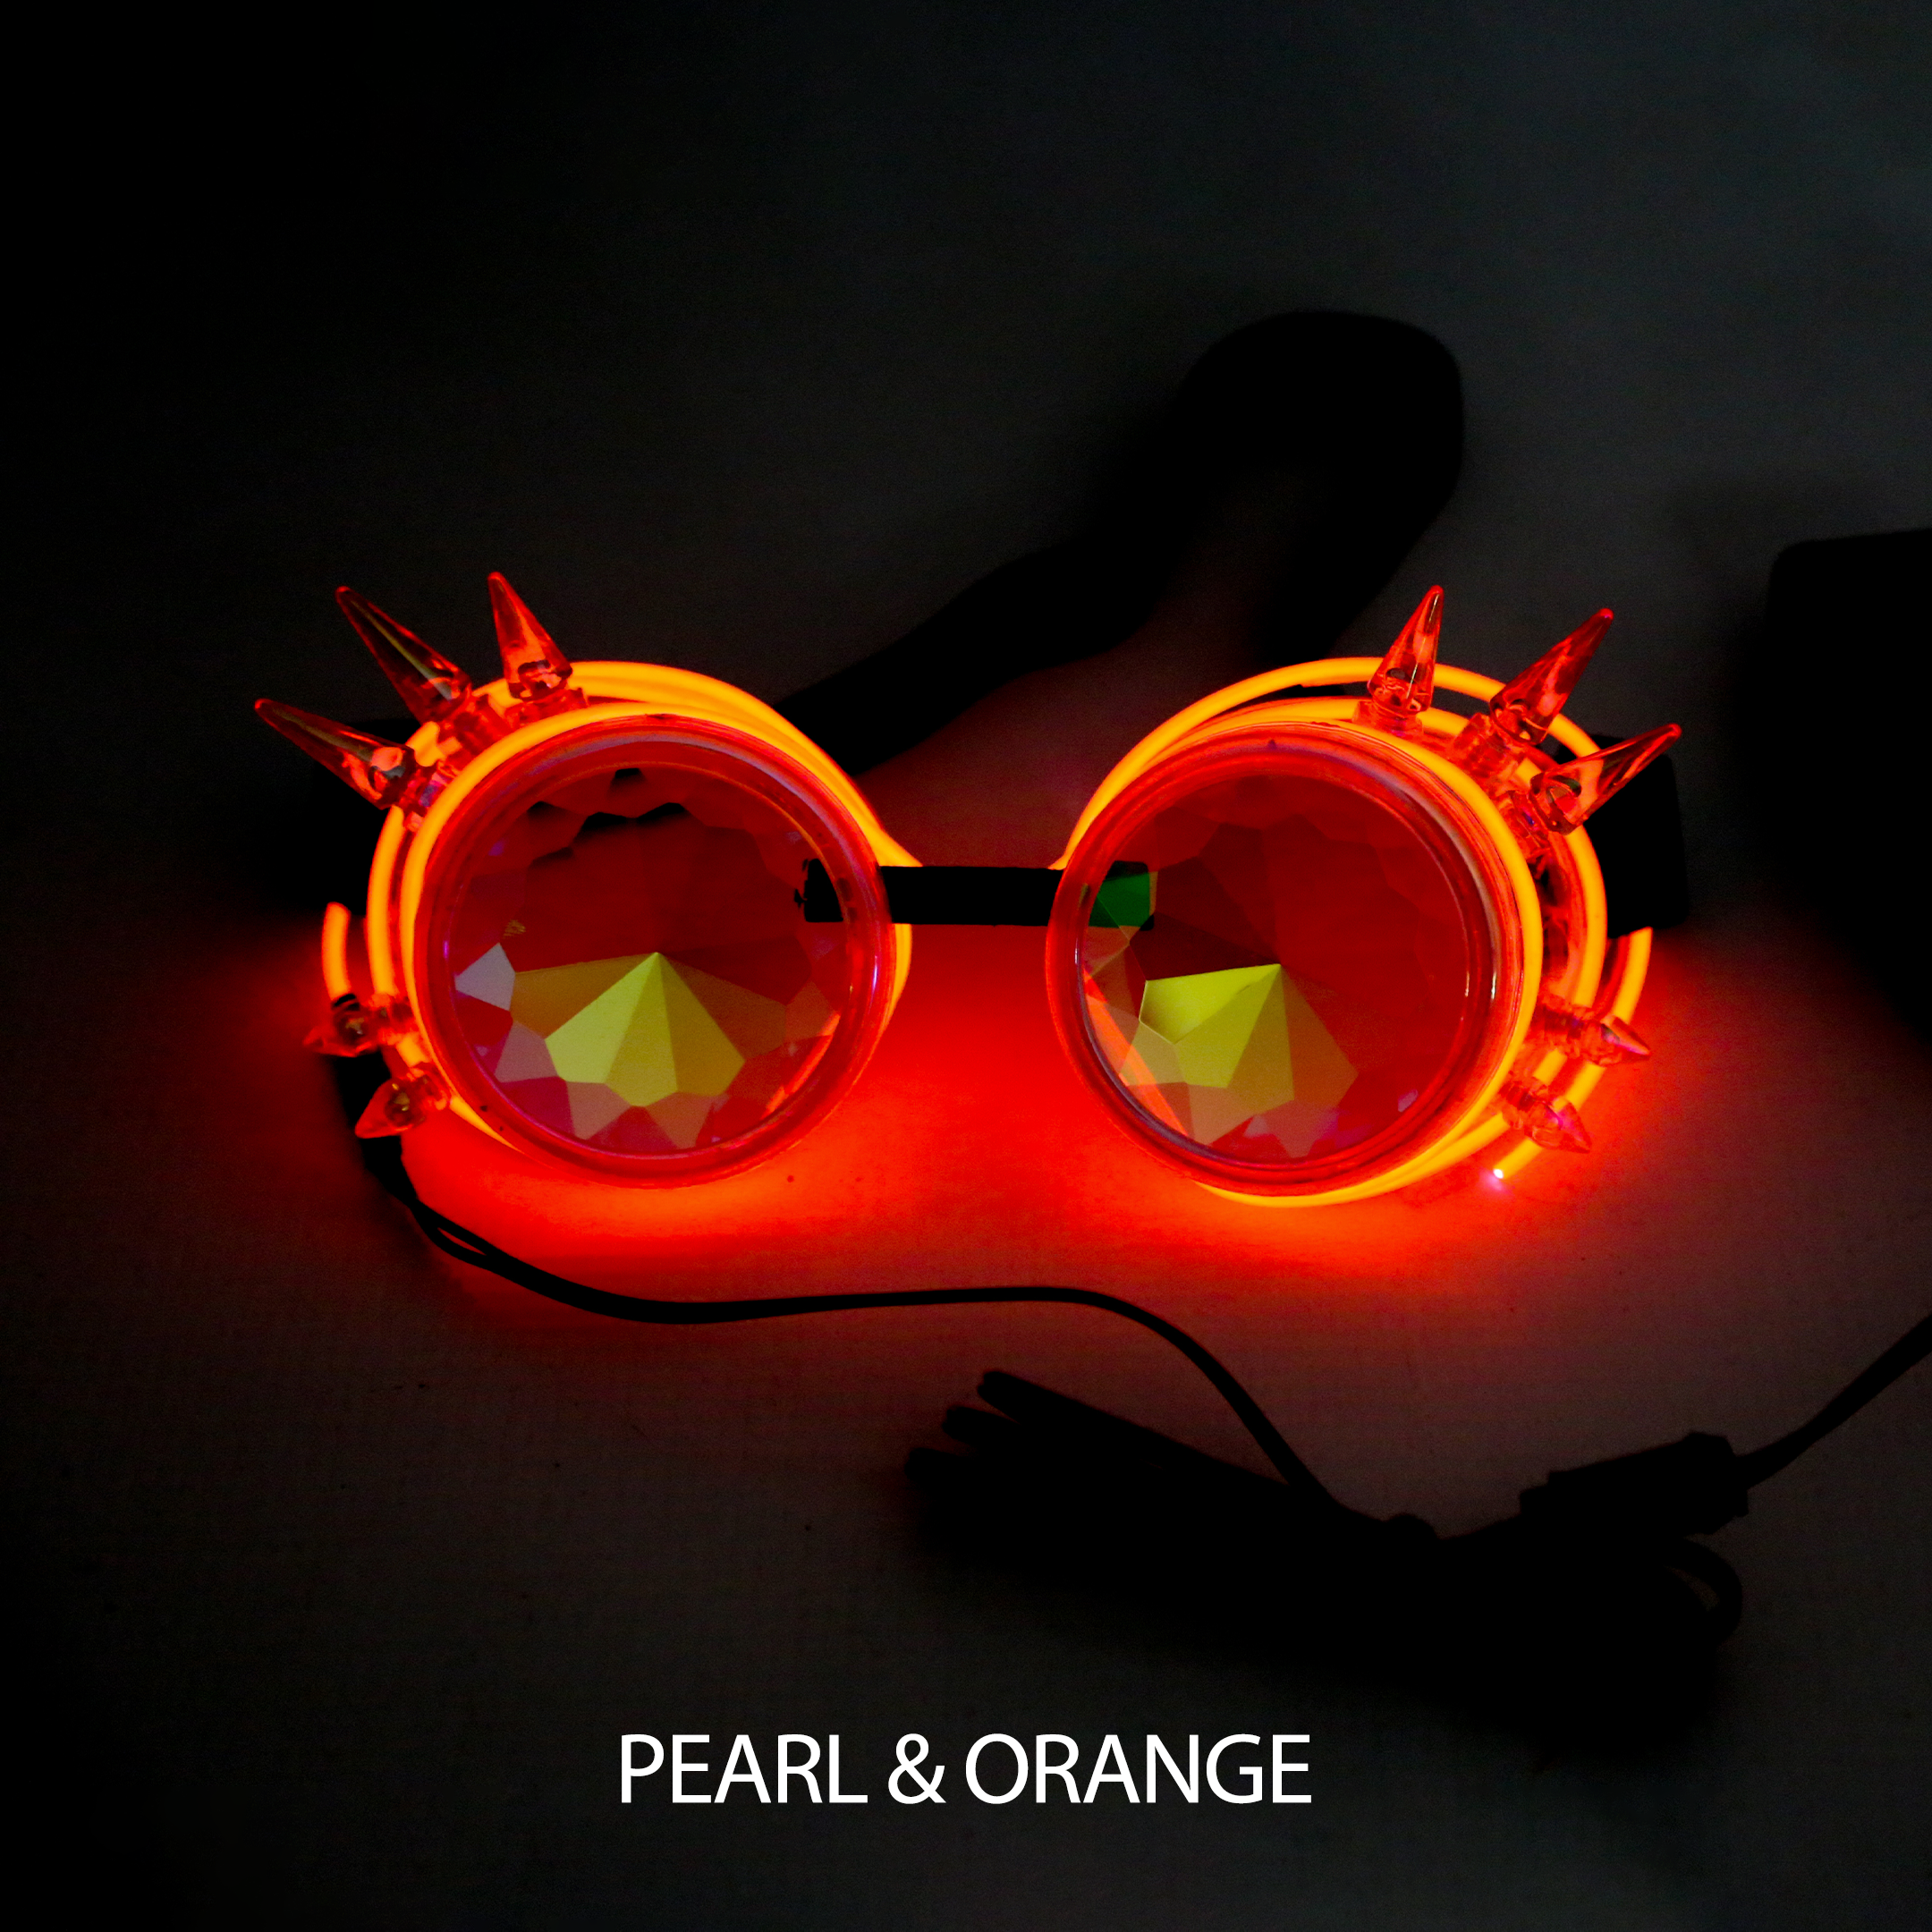 Red LED steampunk Kaleidoscope glasses Electro Glow | South Africa's Best LED Festival Gear & Rave Clothes - festivals outfits, clothes festival, festival clothing south africa, festival ideas outfits, festival outfits rave, festival wear, steam punk goggle, rave glasses, outfit for a rave, kaleidoscope glasses, diffraction glasses, clothes for a rave, rave sunglasses, spectral glasses, rave goggles, clothes for a rave, rave clothing south africa, festival wear south africa, accessories festival